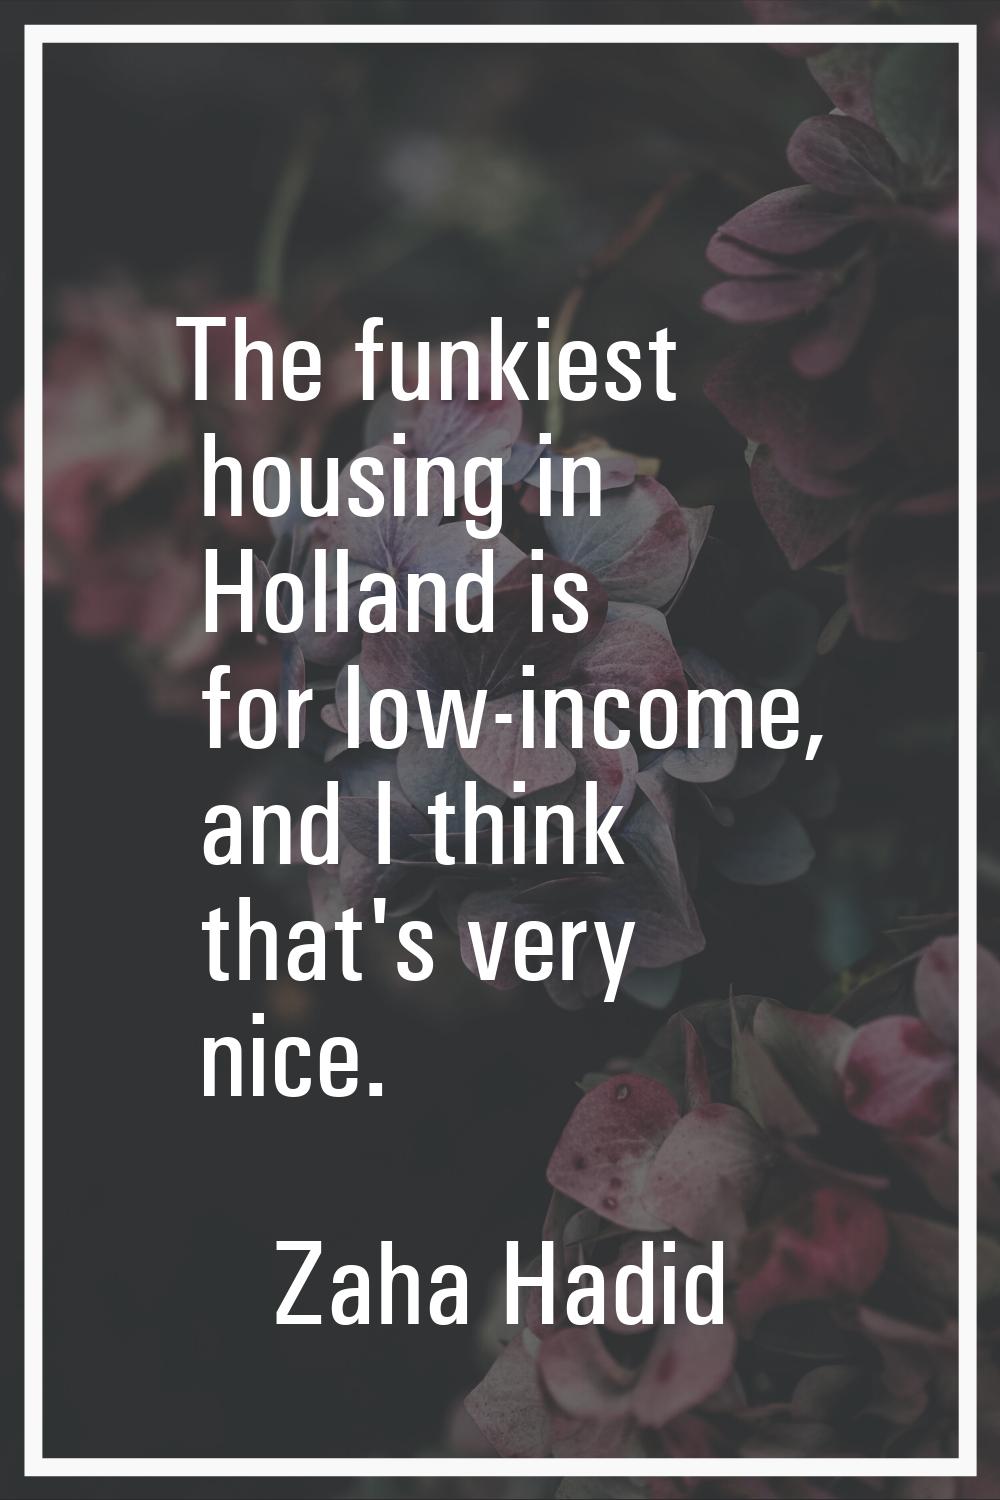 The funkiest housing in Holland is for low-income, and I think that's very nice.